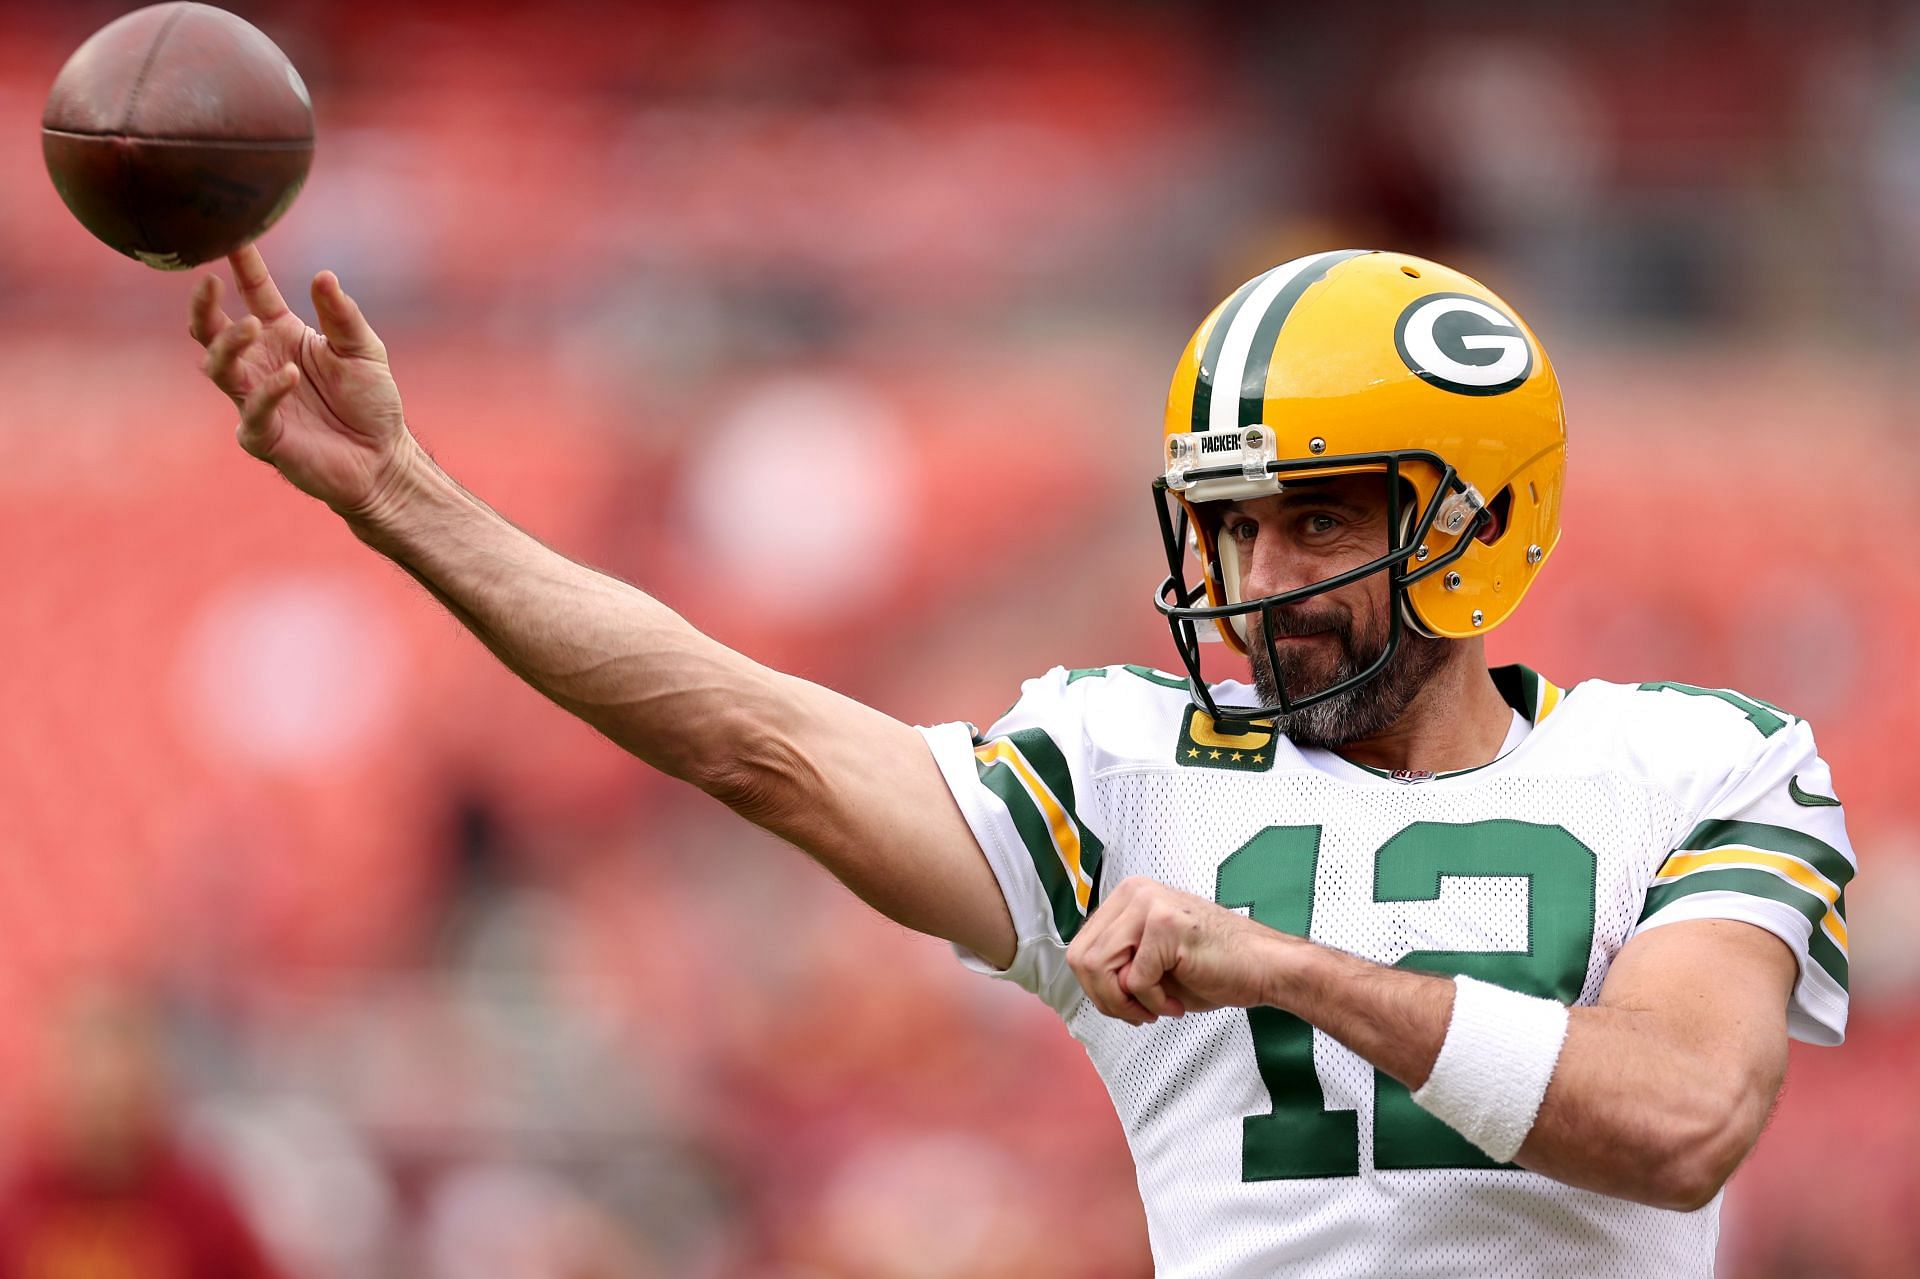 Aaron Rodgers for Green Bay Packers v Washington Commanders